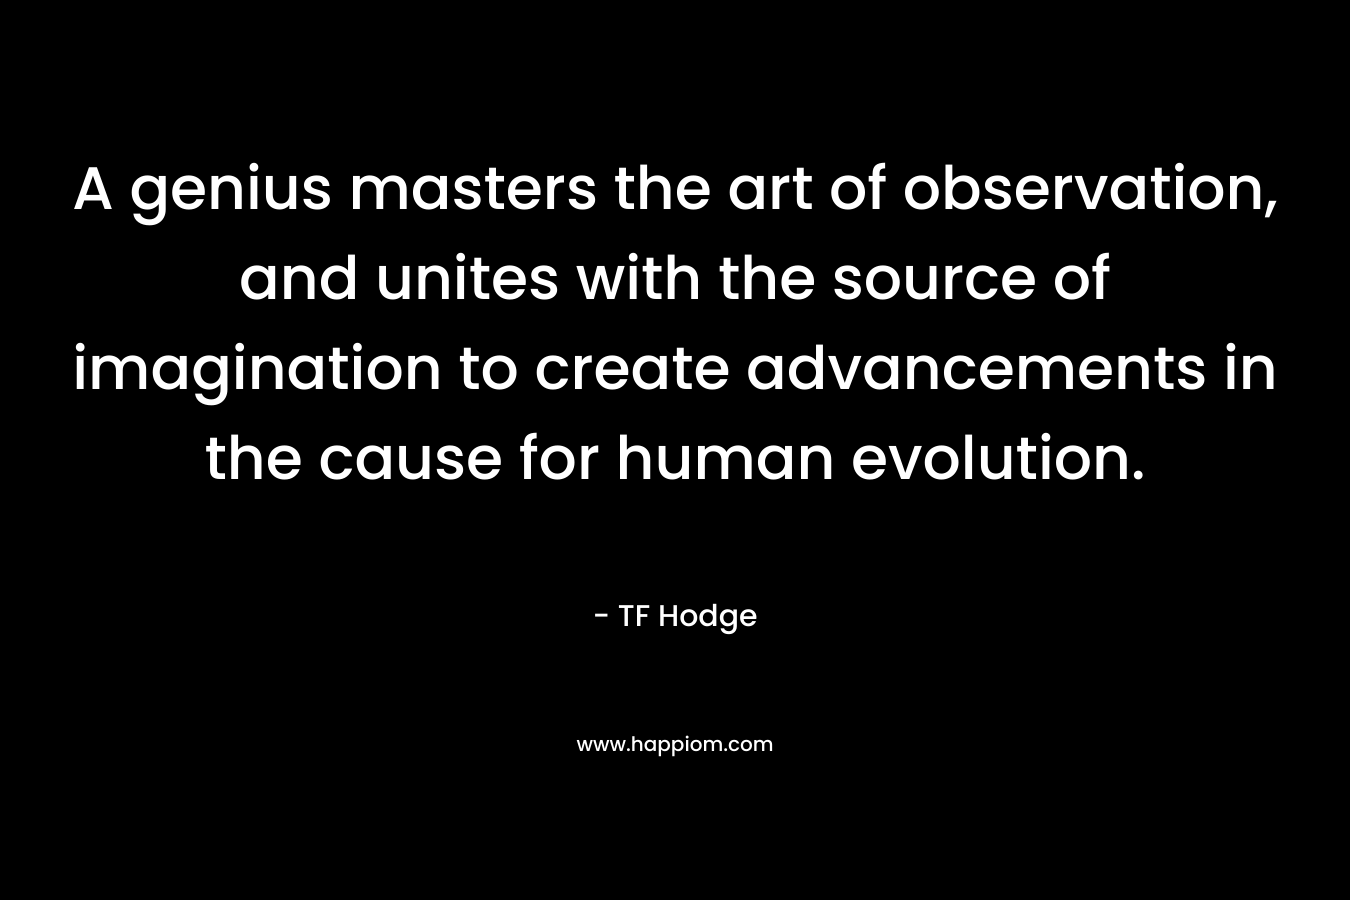 A genius masters the art of observation, and unites with the source of imagination to create advancements in the cause for human evolution.